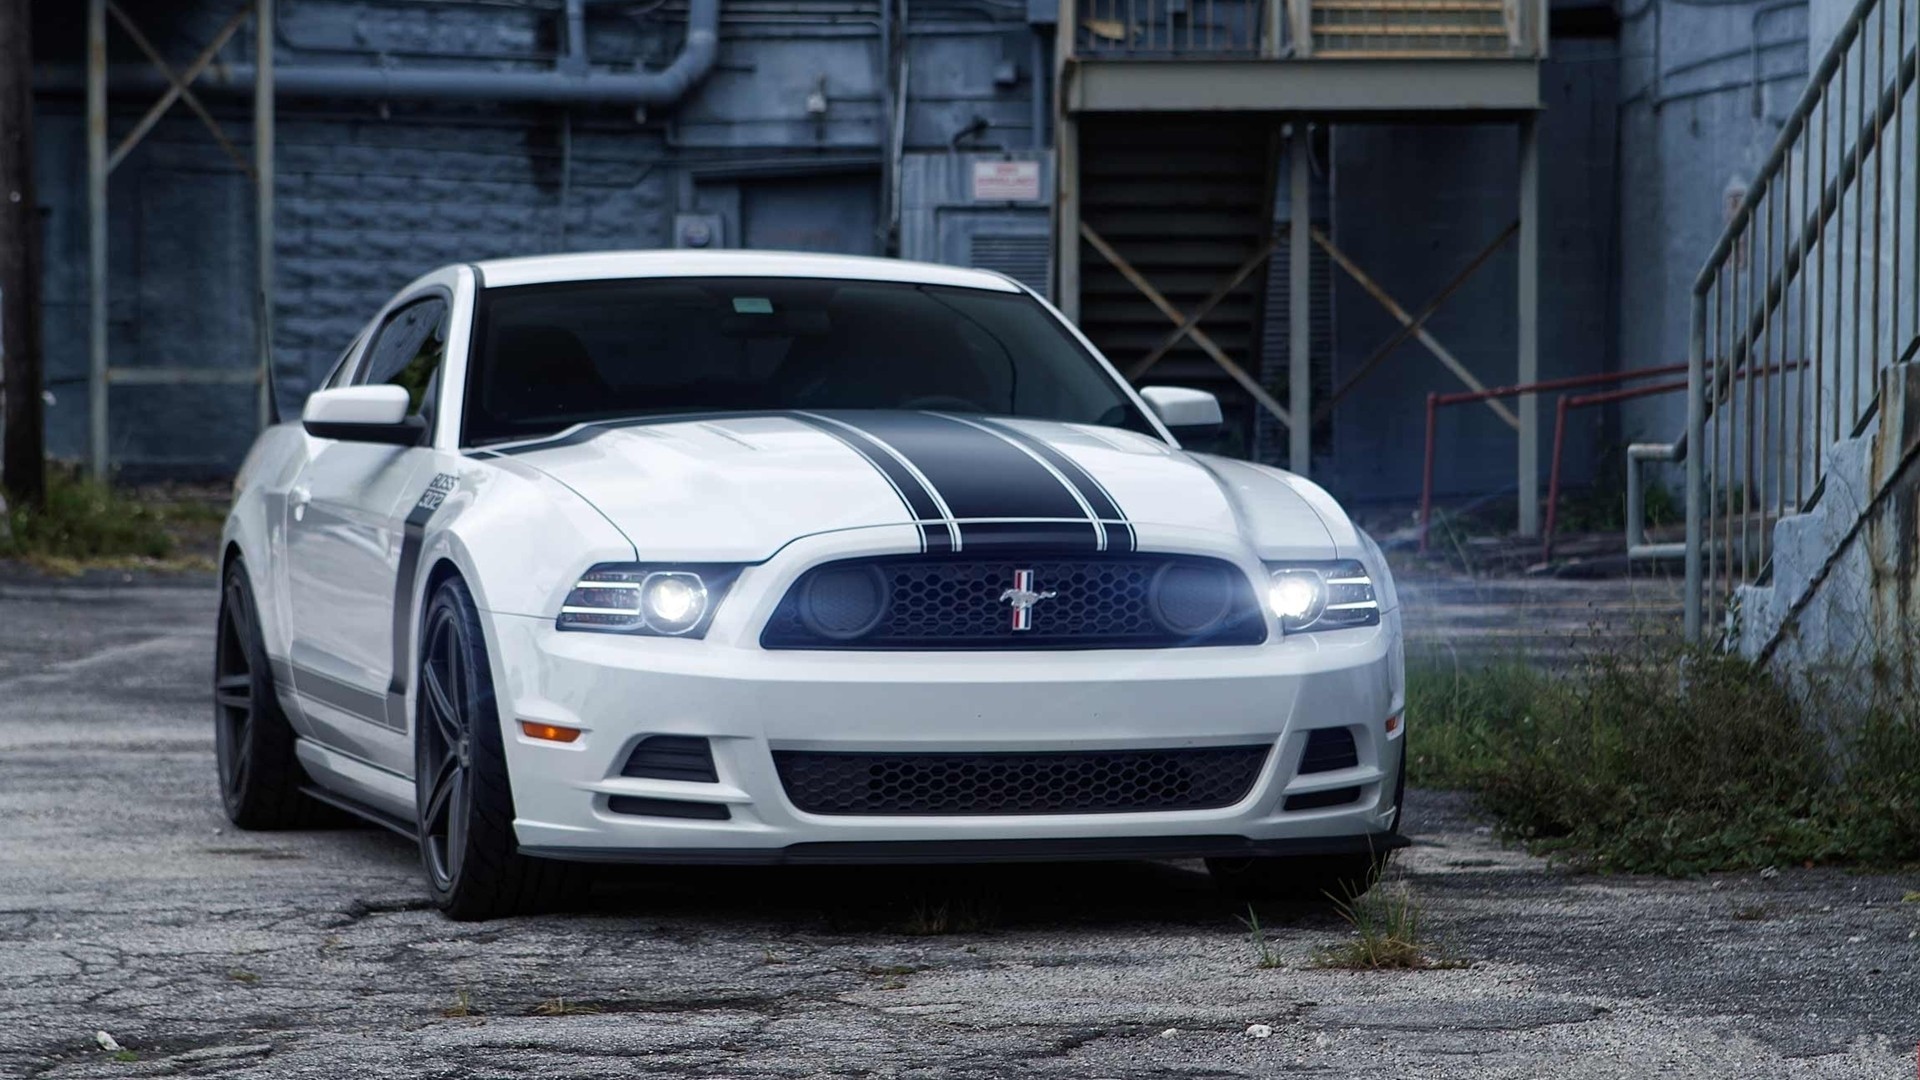 General 1920x1080 car Ford white cars vehicle Ford Mustang racing stripes muscle cars American cars